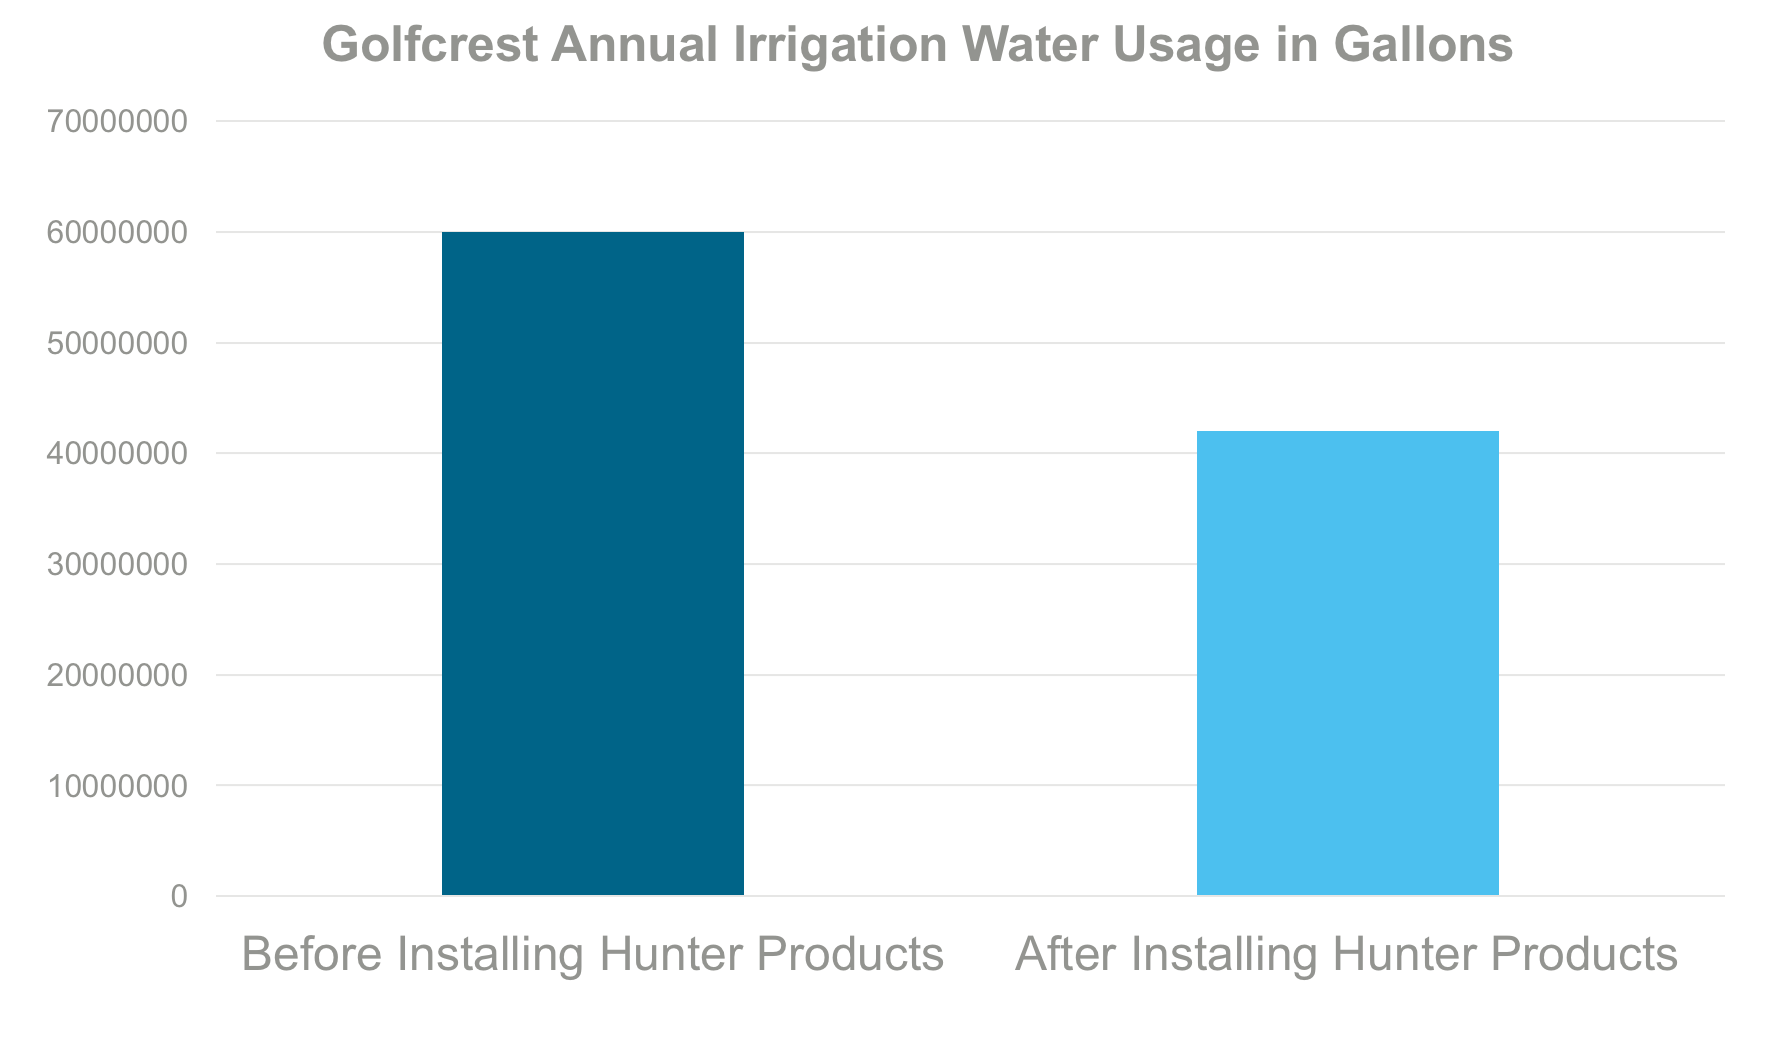 Chart showing Golfcrest annual irrigation water usage in gallons